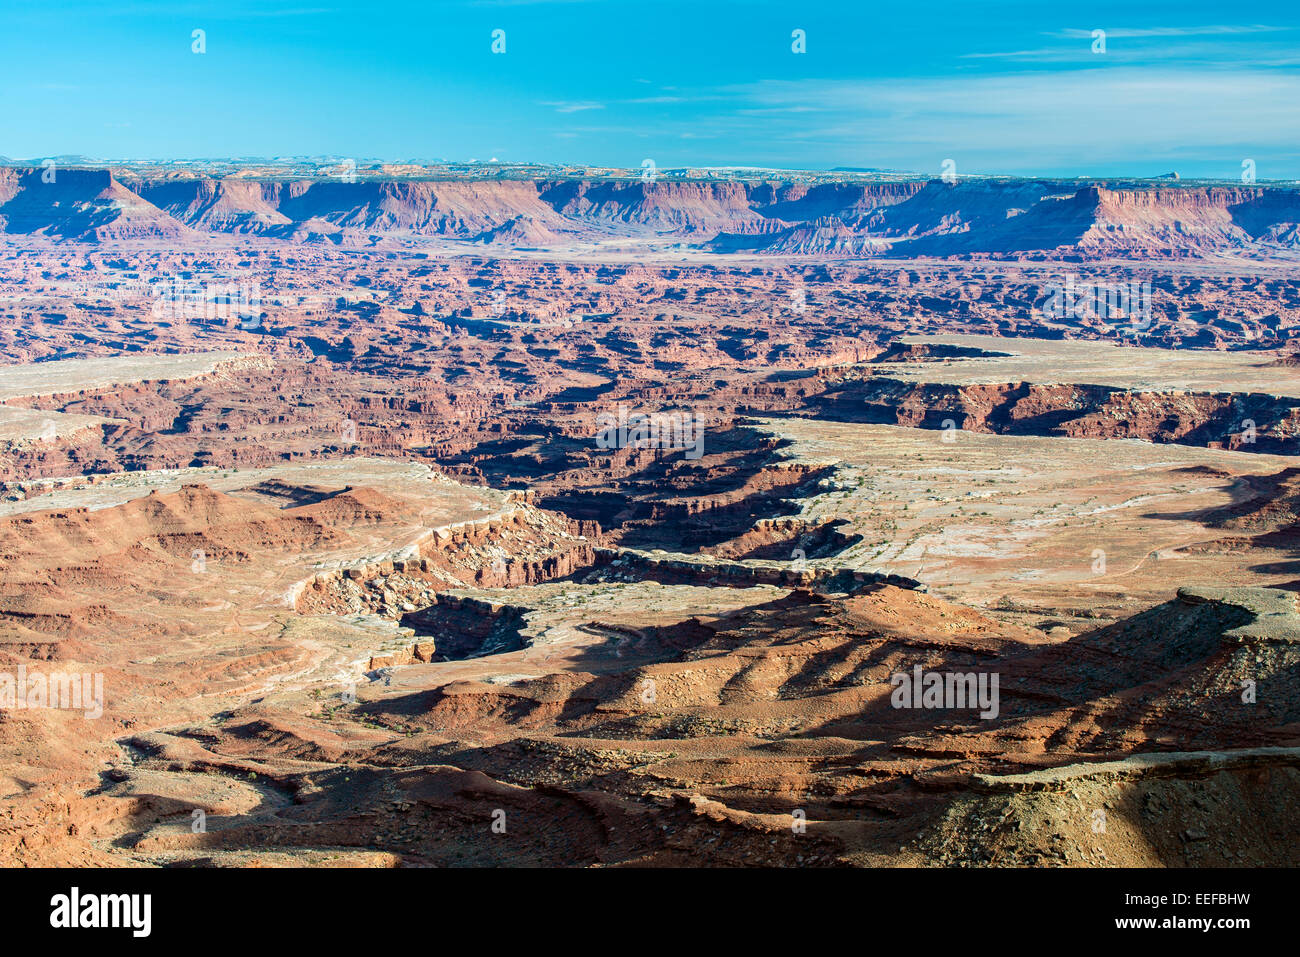 Grand View Point oublier, Canyonlands National Park, Utah, USA Banque D'Images